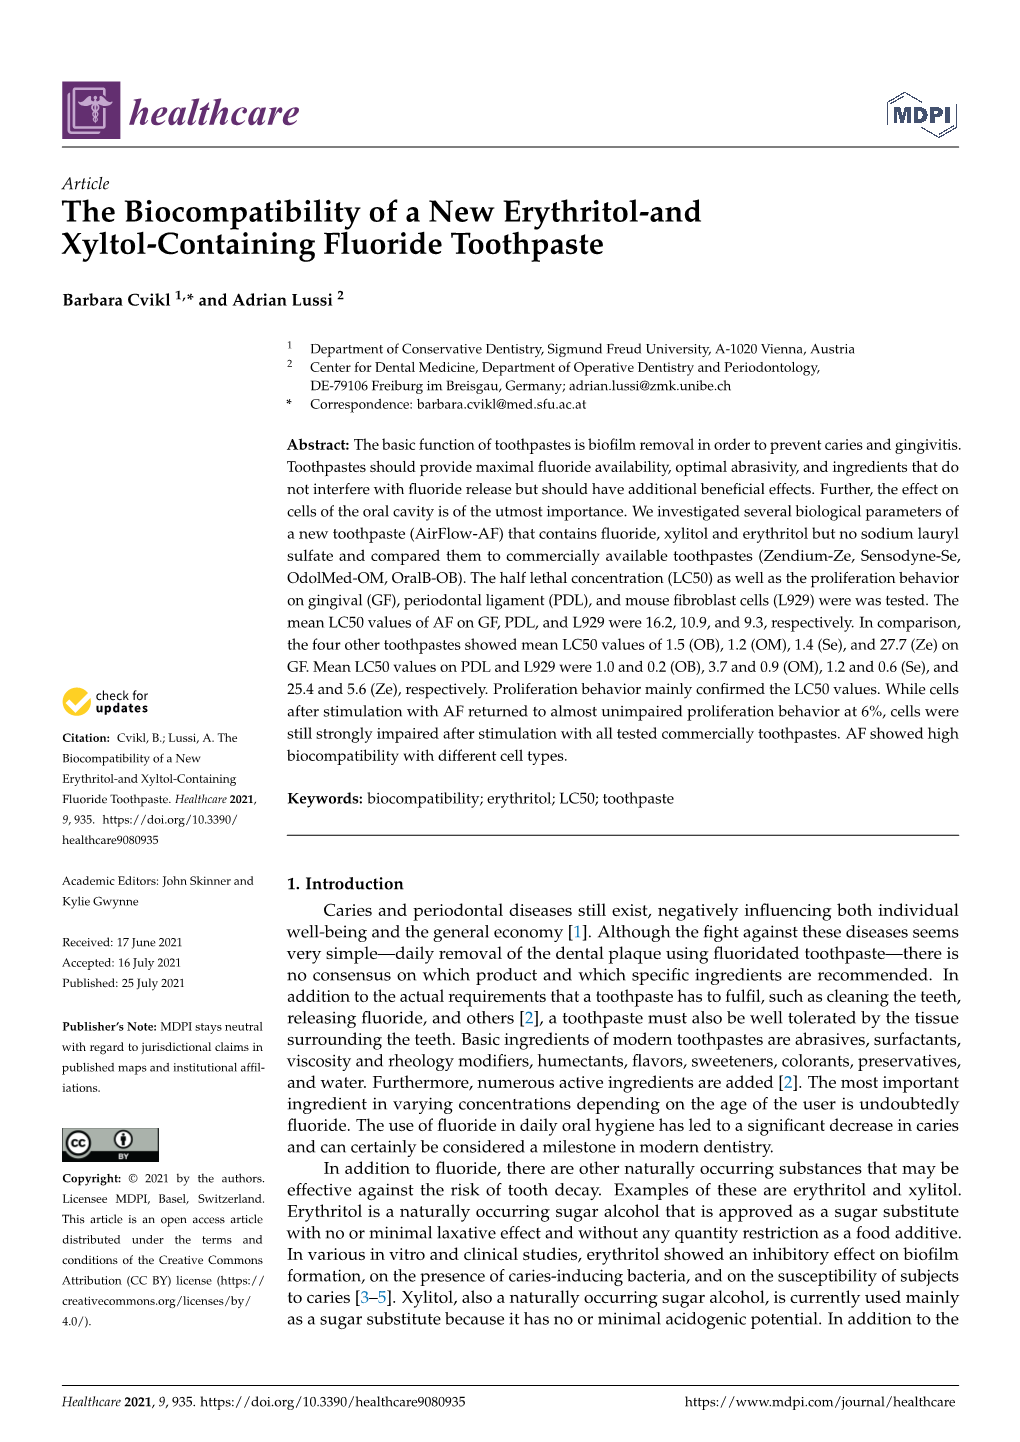 The Biocompatibility of a New Erythritol-And Xyltol-Containing Fluoride Toothpaste